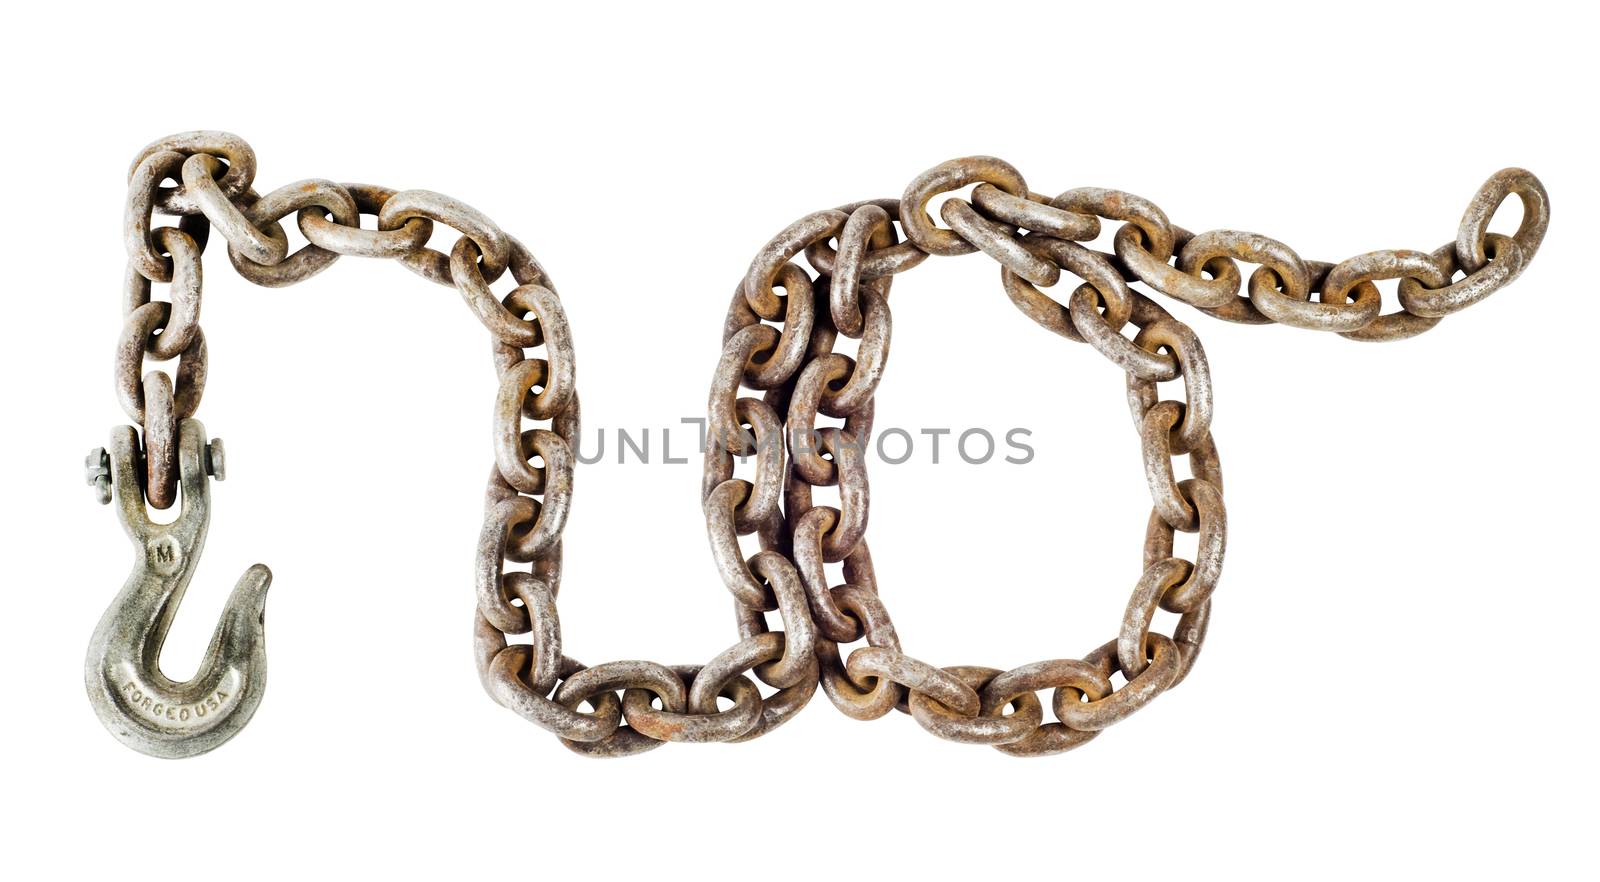 A short chain and hook in the form of the cursive word no. Isolated on a white background with a complete clipping path.